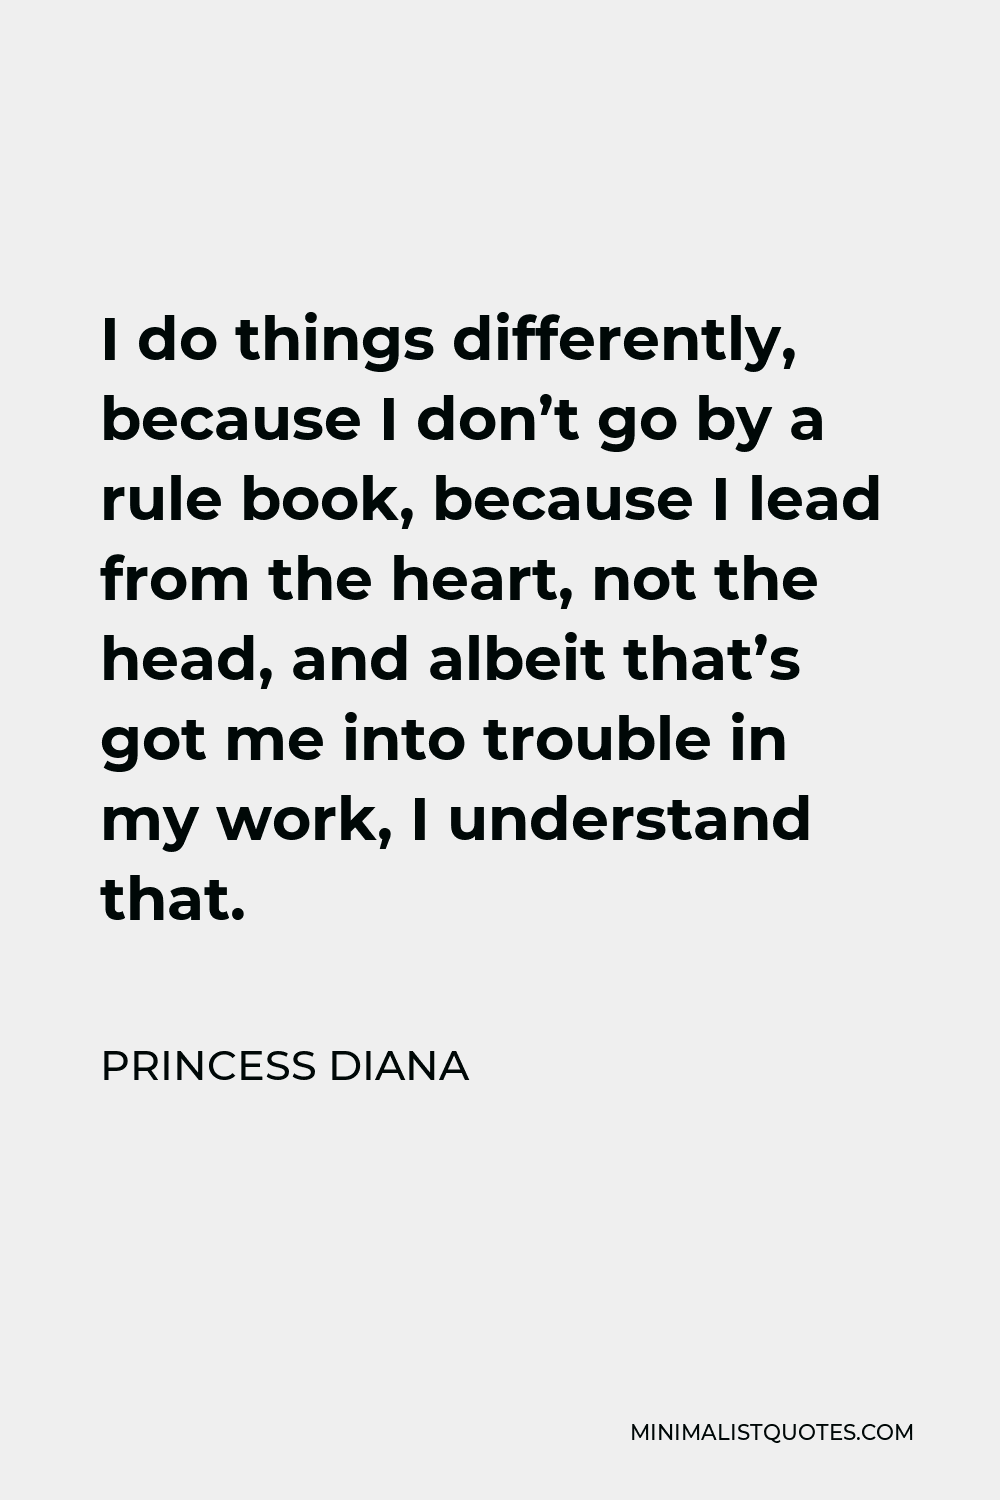 Princess Diana Quote - I do things differently, because I don’t go by a rule book, because I lead from the heart, not the head, and albeit that’s got me into trouble in my work, I understand that.